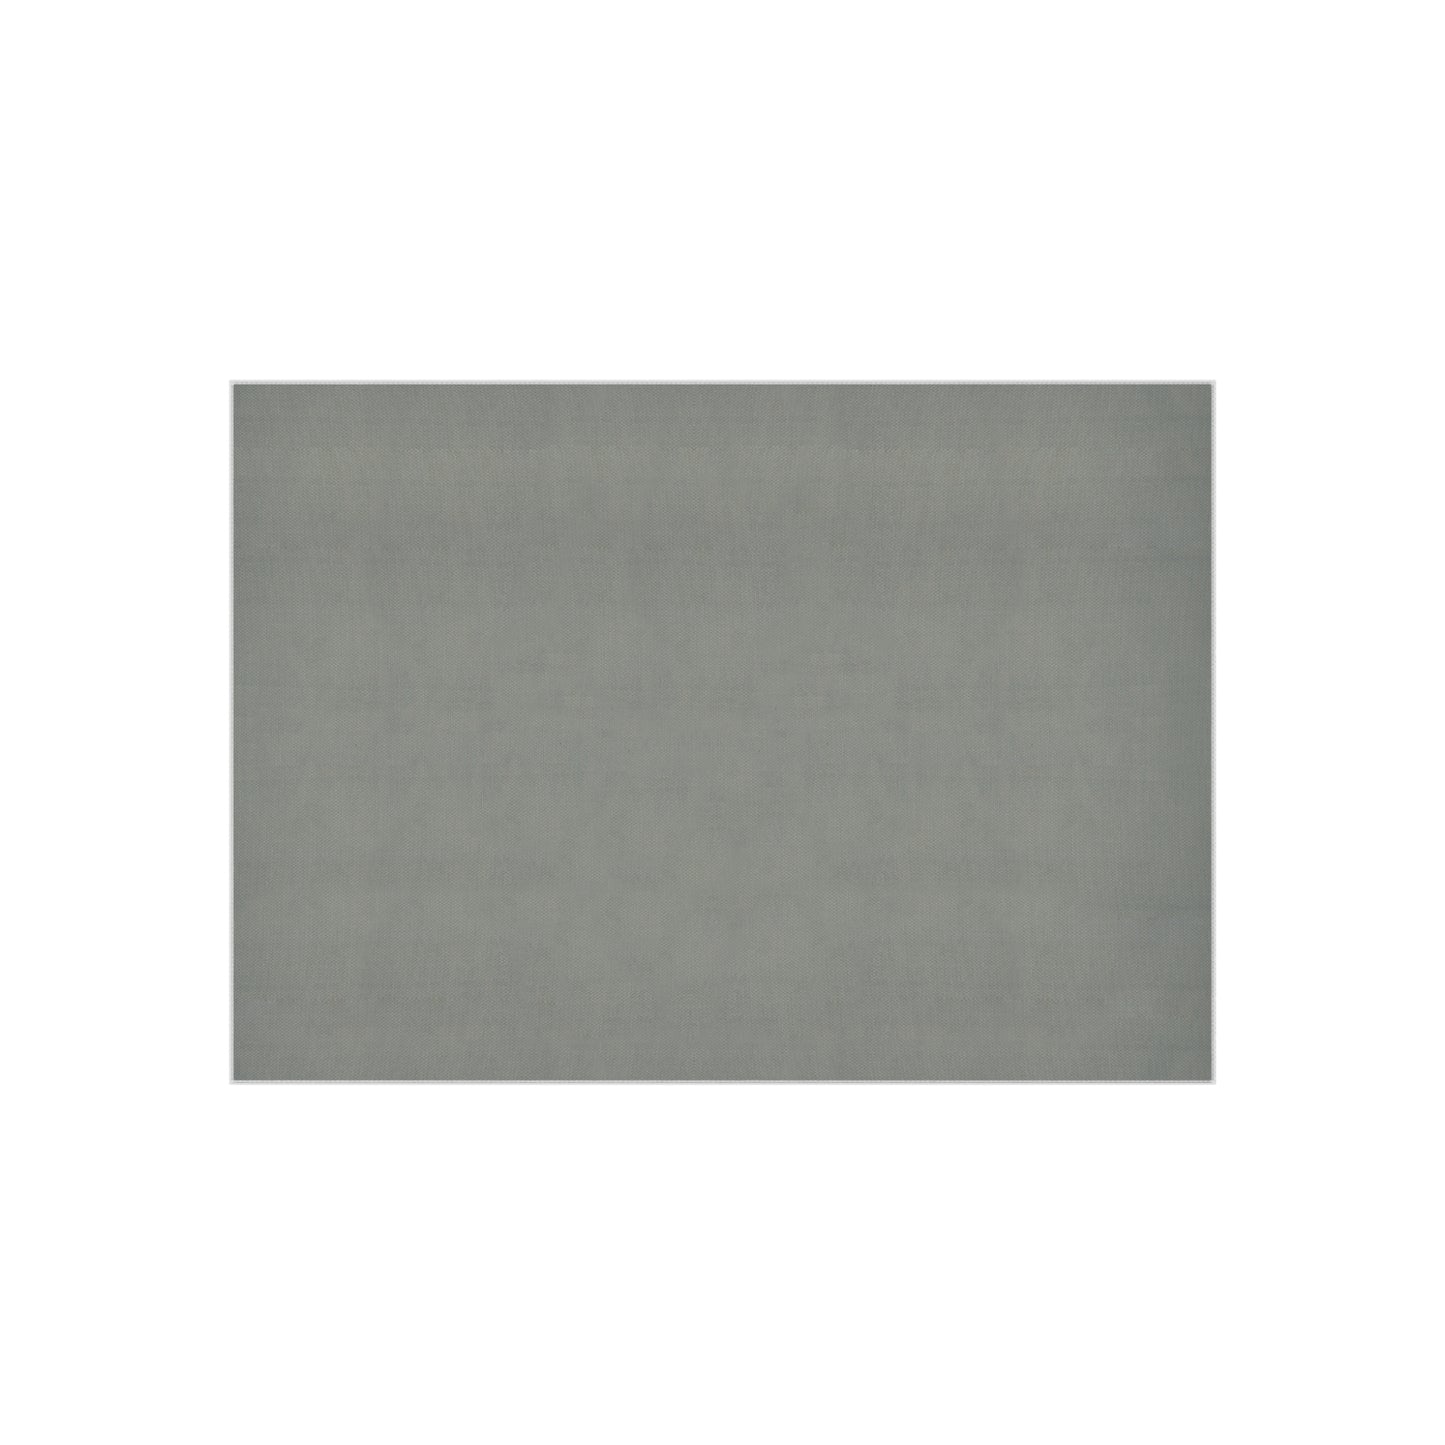 Outdoor Rug  918 Spyder white background driving fast with water splashing 5